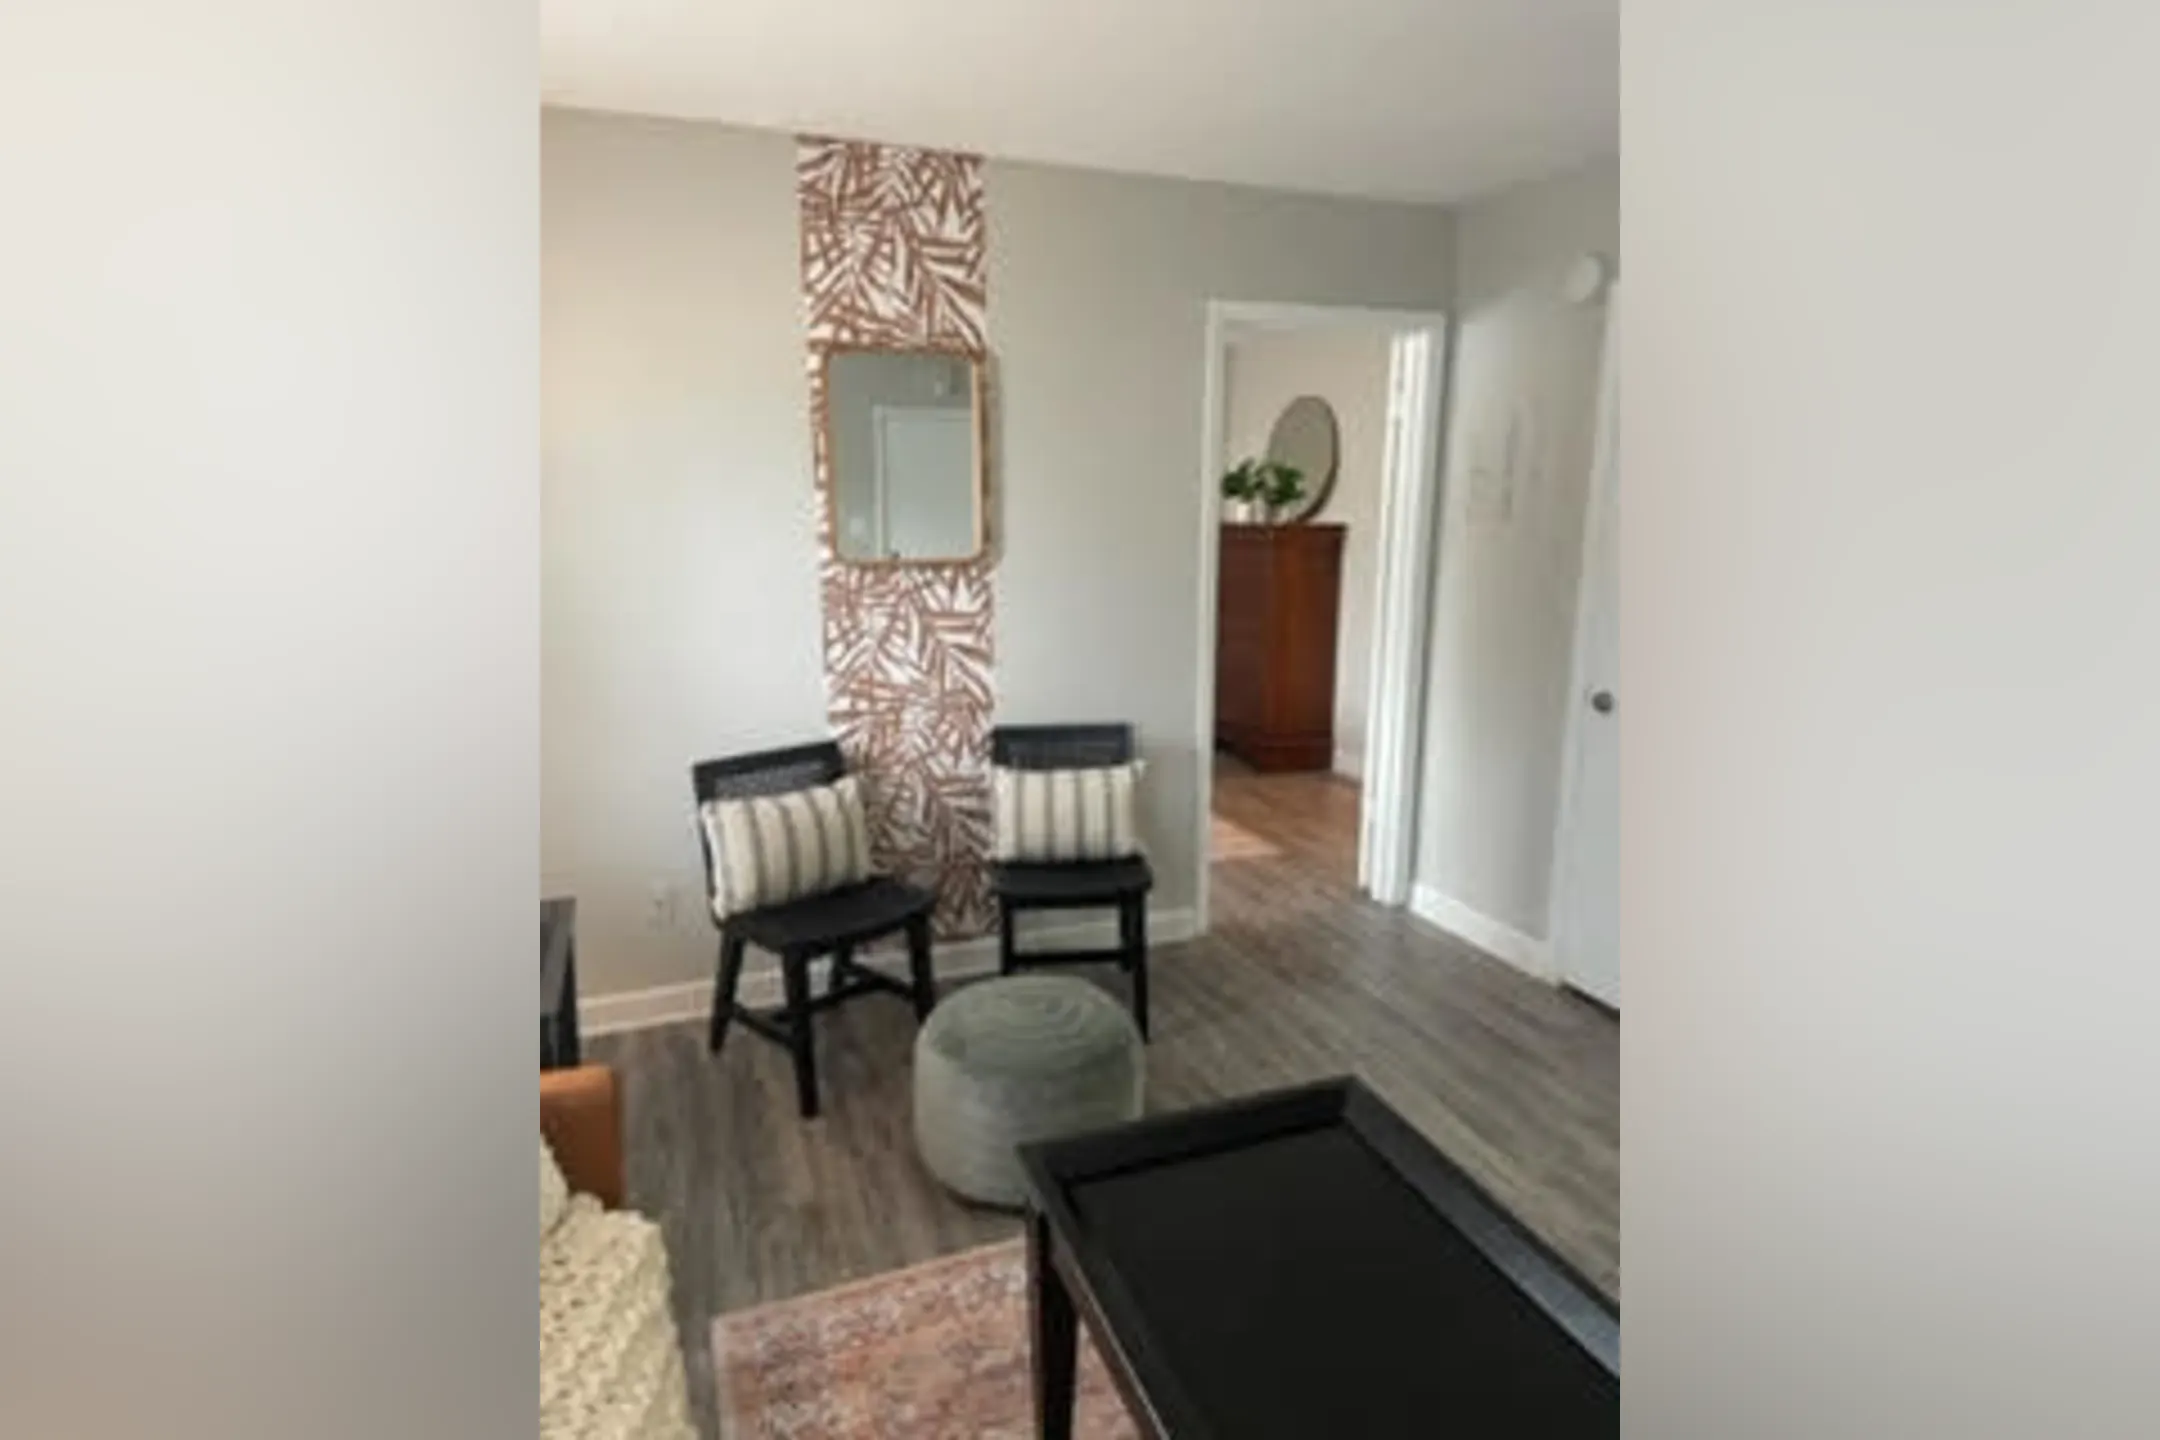 Dining Room - Woodhaven Apartments - Augusta, GA